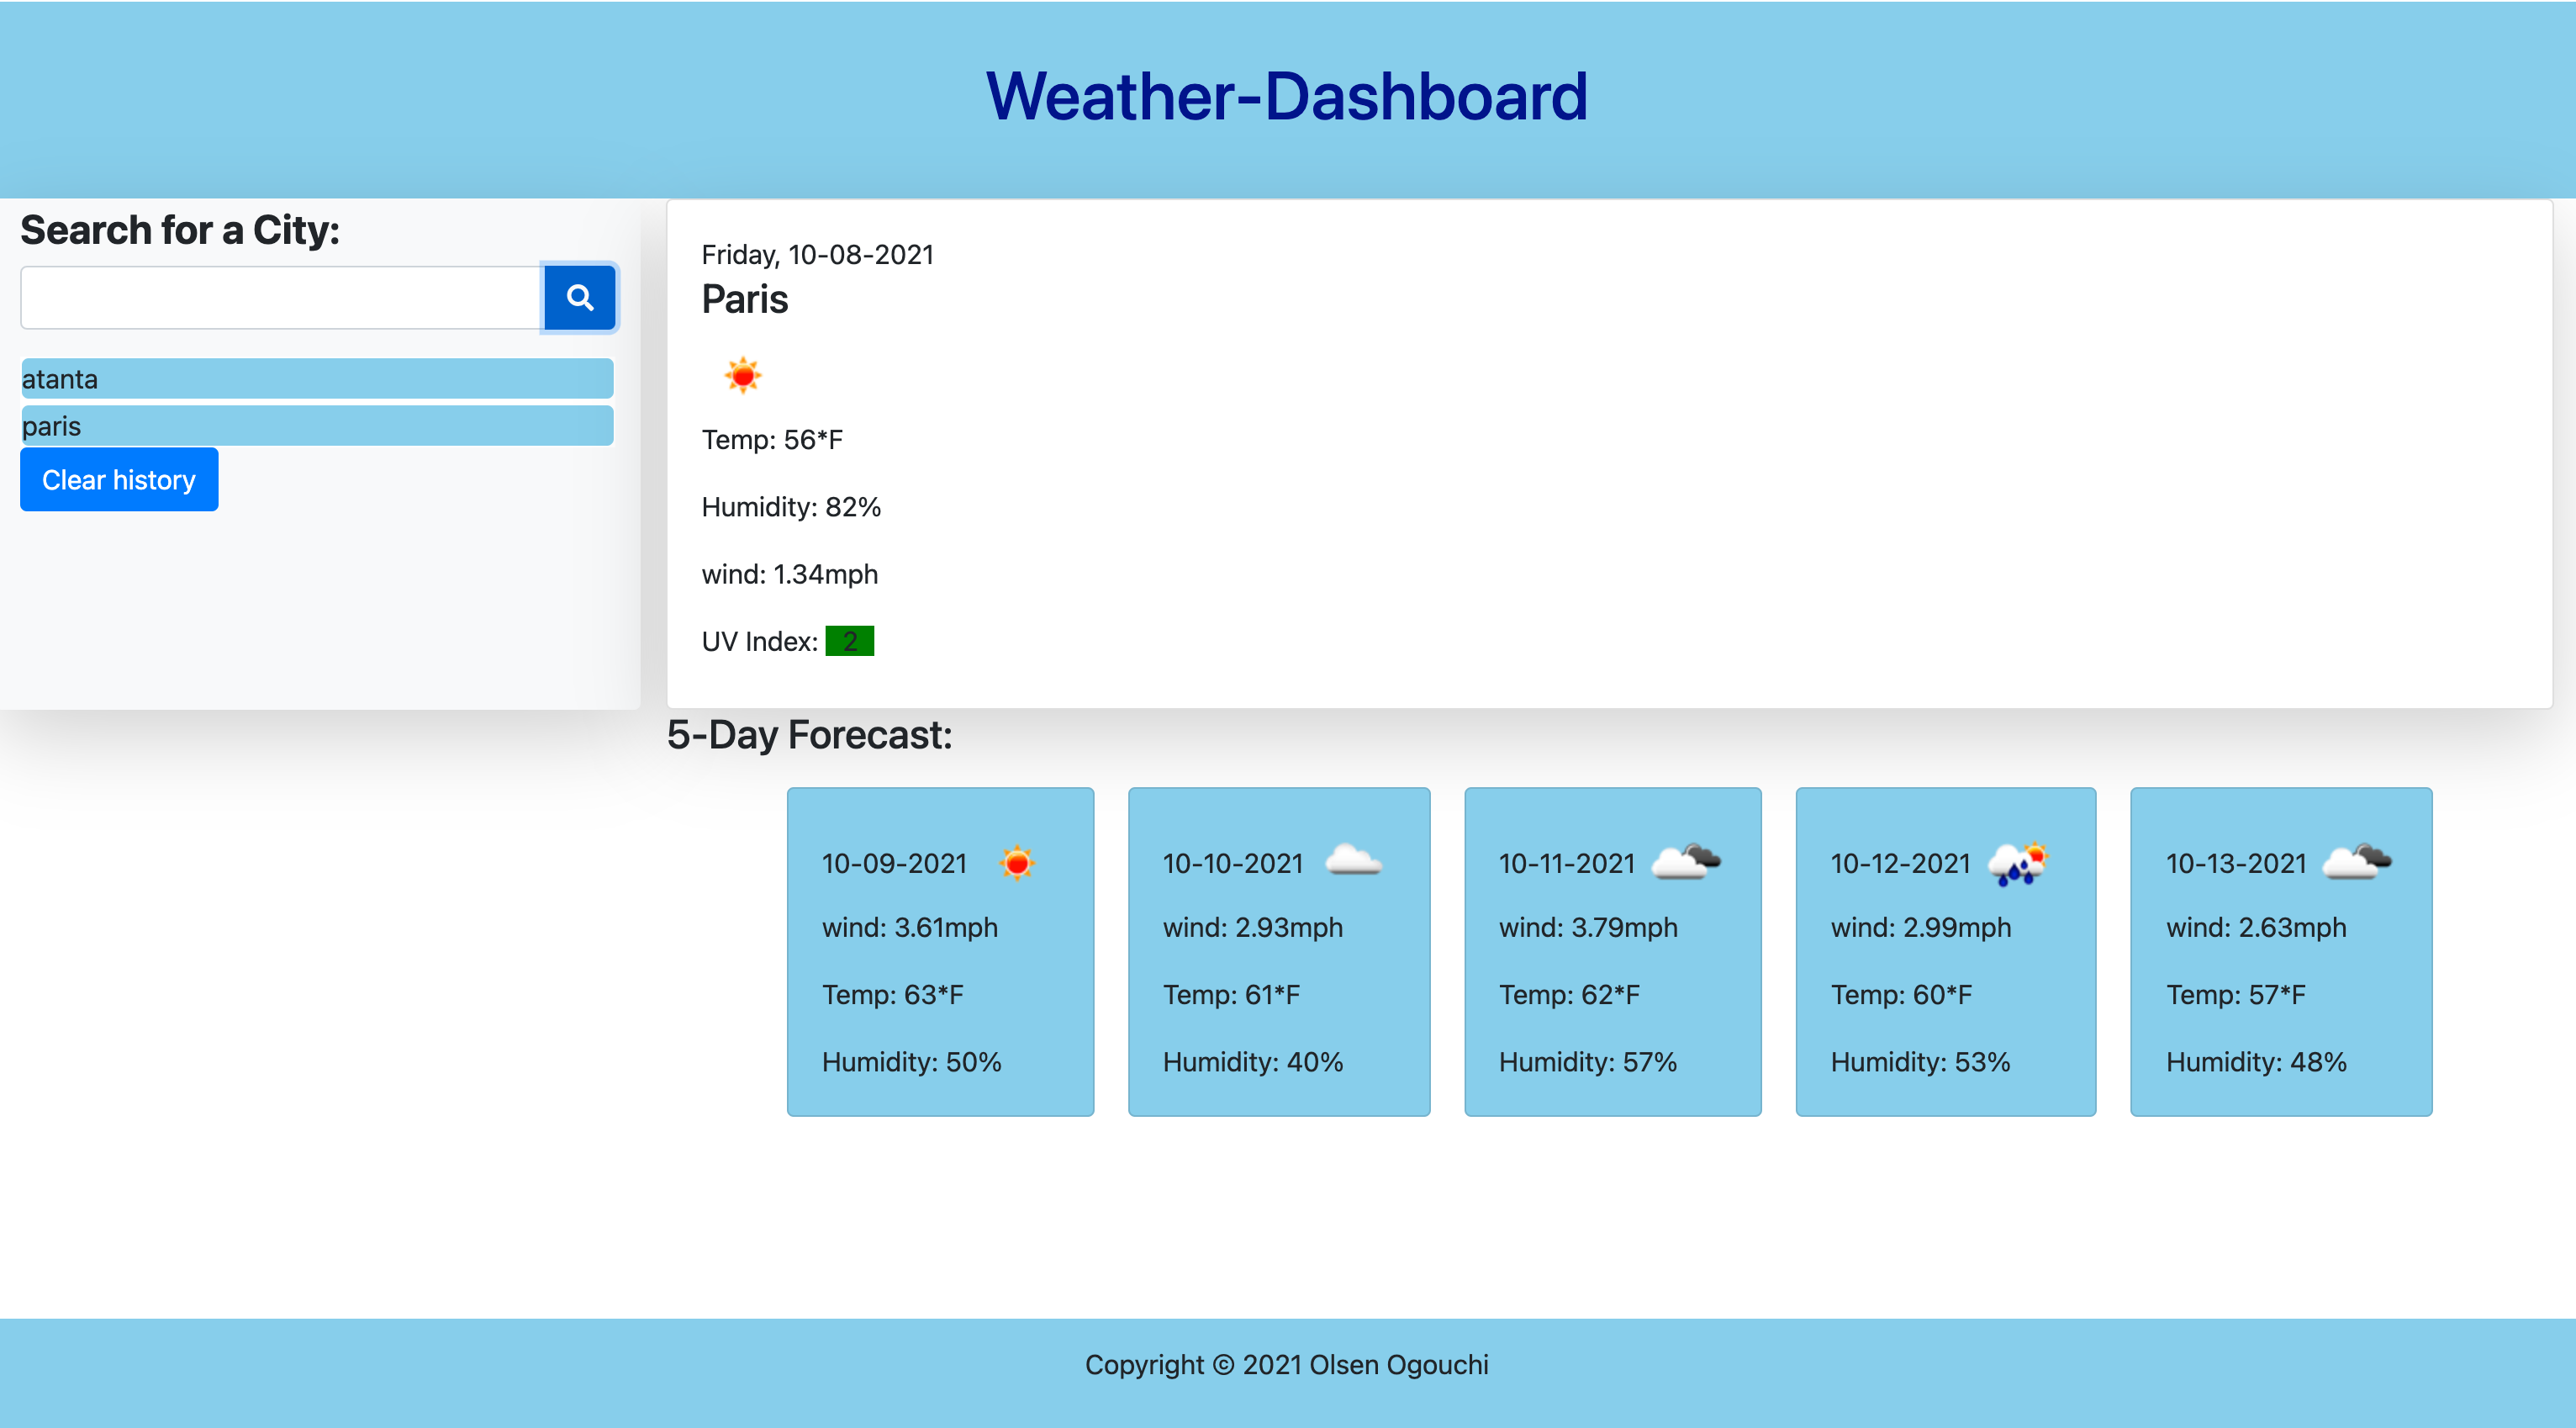 Weather-Dashboard projects